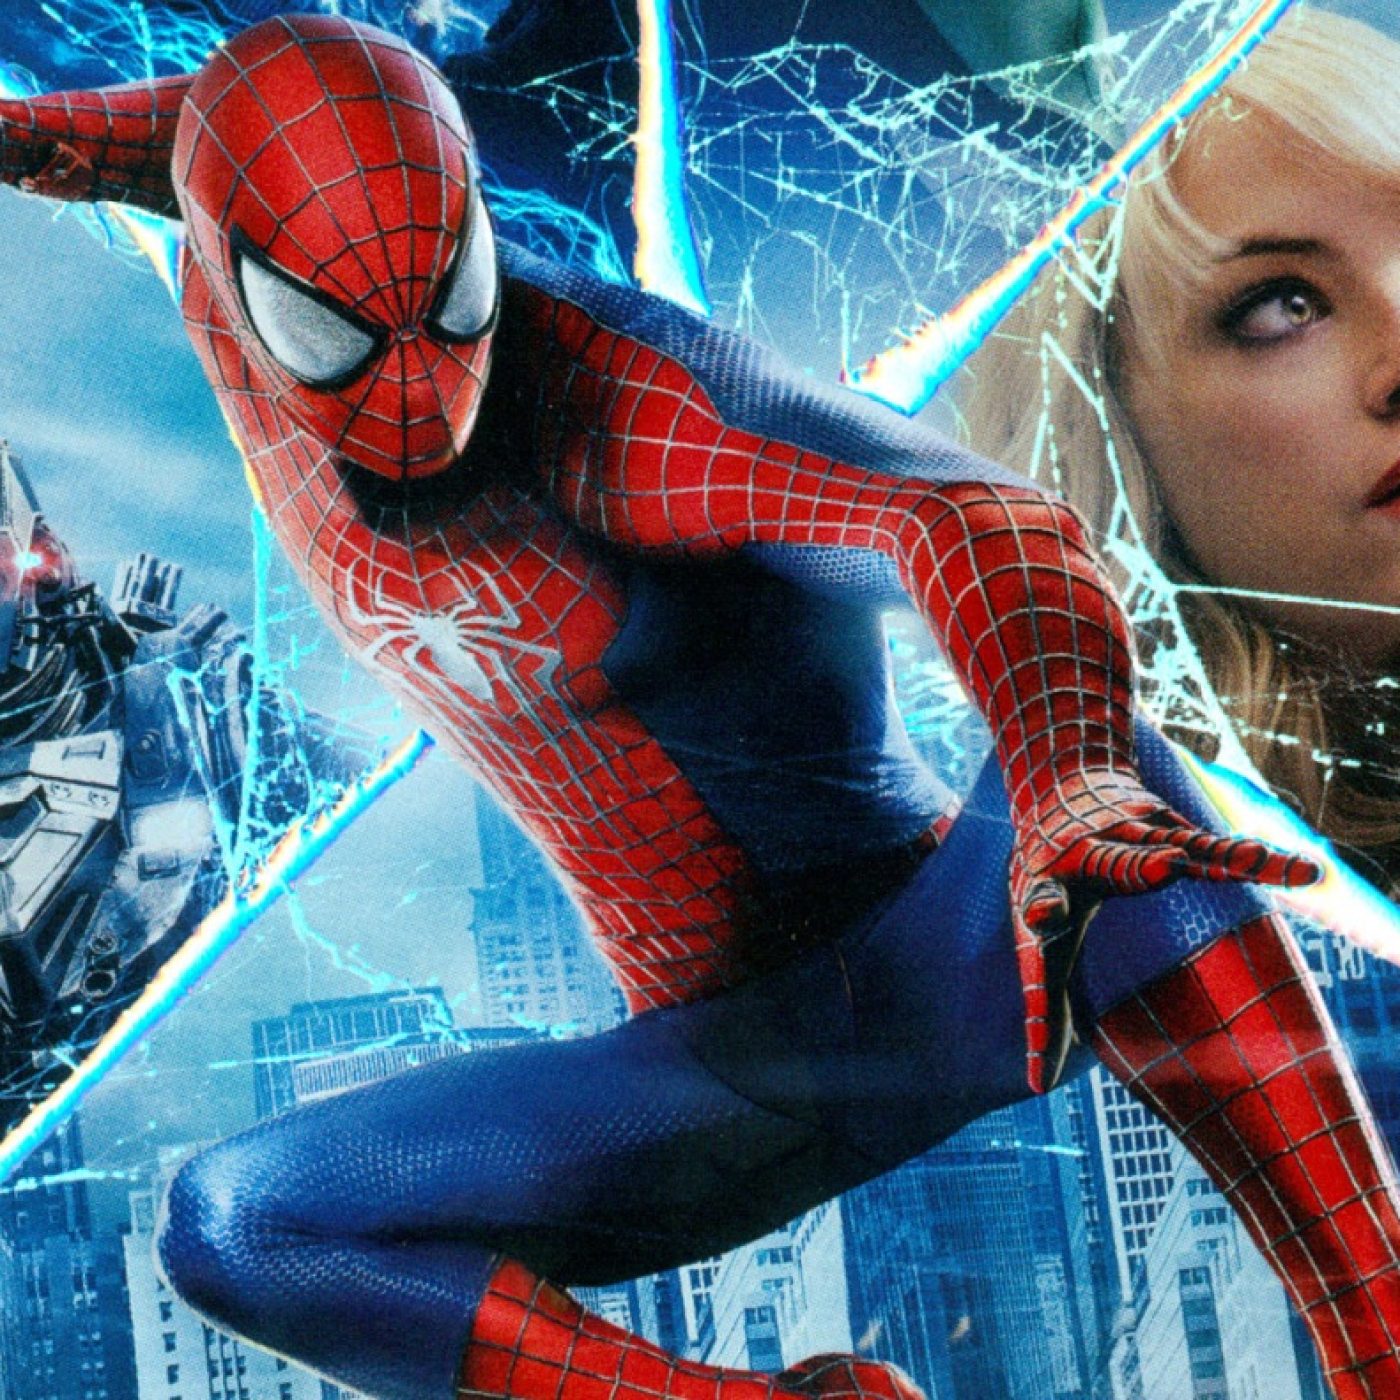 Amazing Spider-Man 3 rumors say Andrew Garfield is coming back